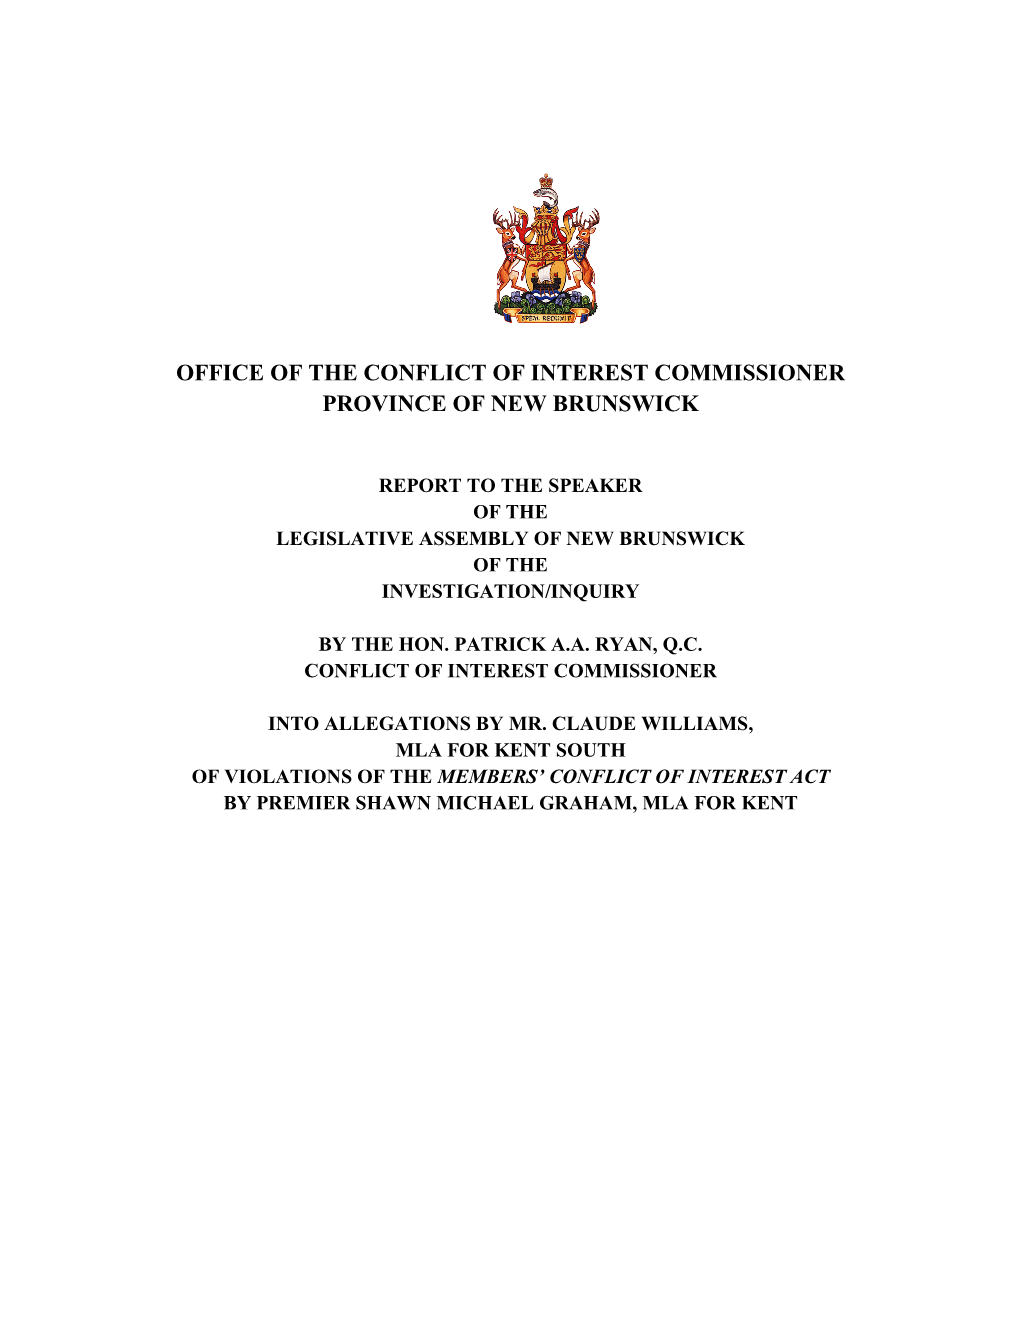 Report to the Speaker of the Legislative Assembly of New Brunswick of the Investigation/Inquiry by the Hon